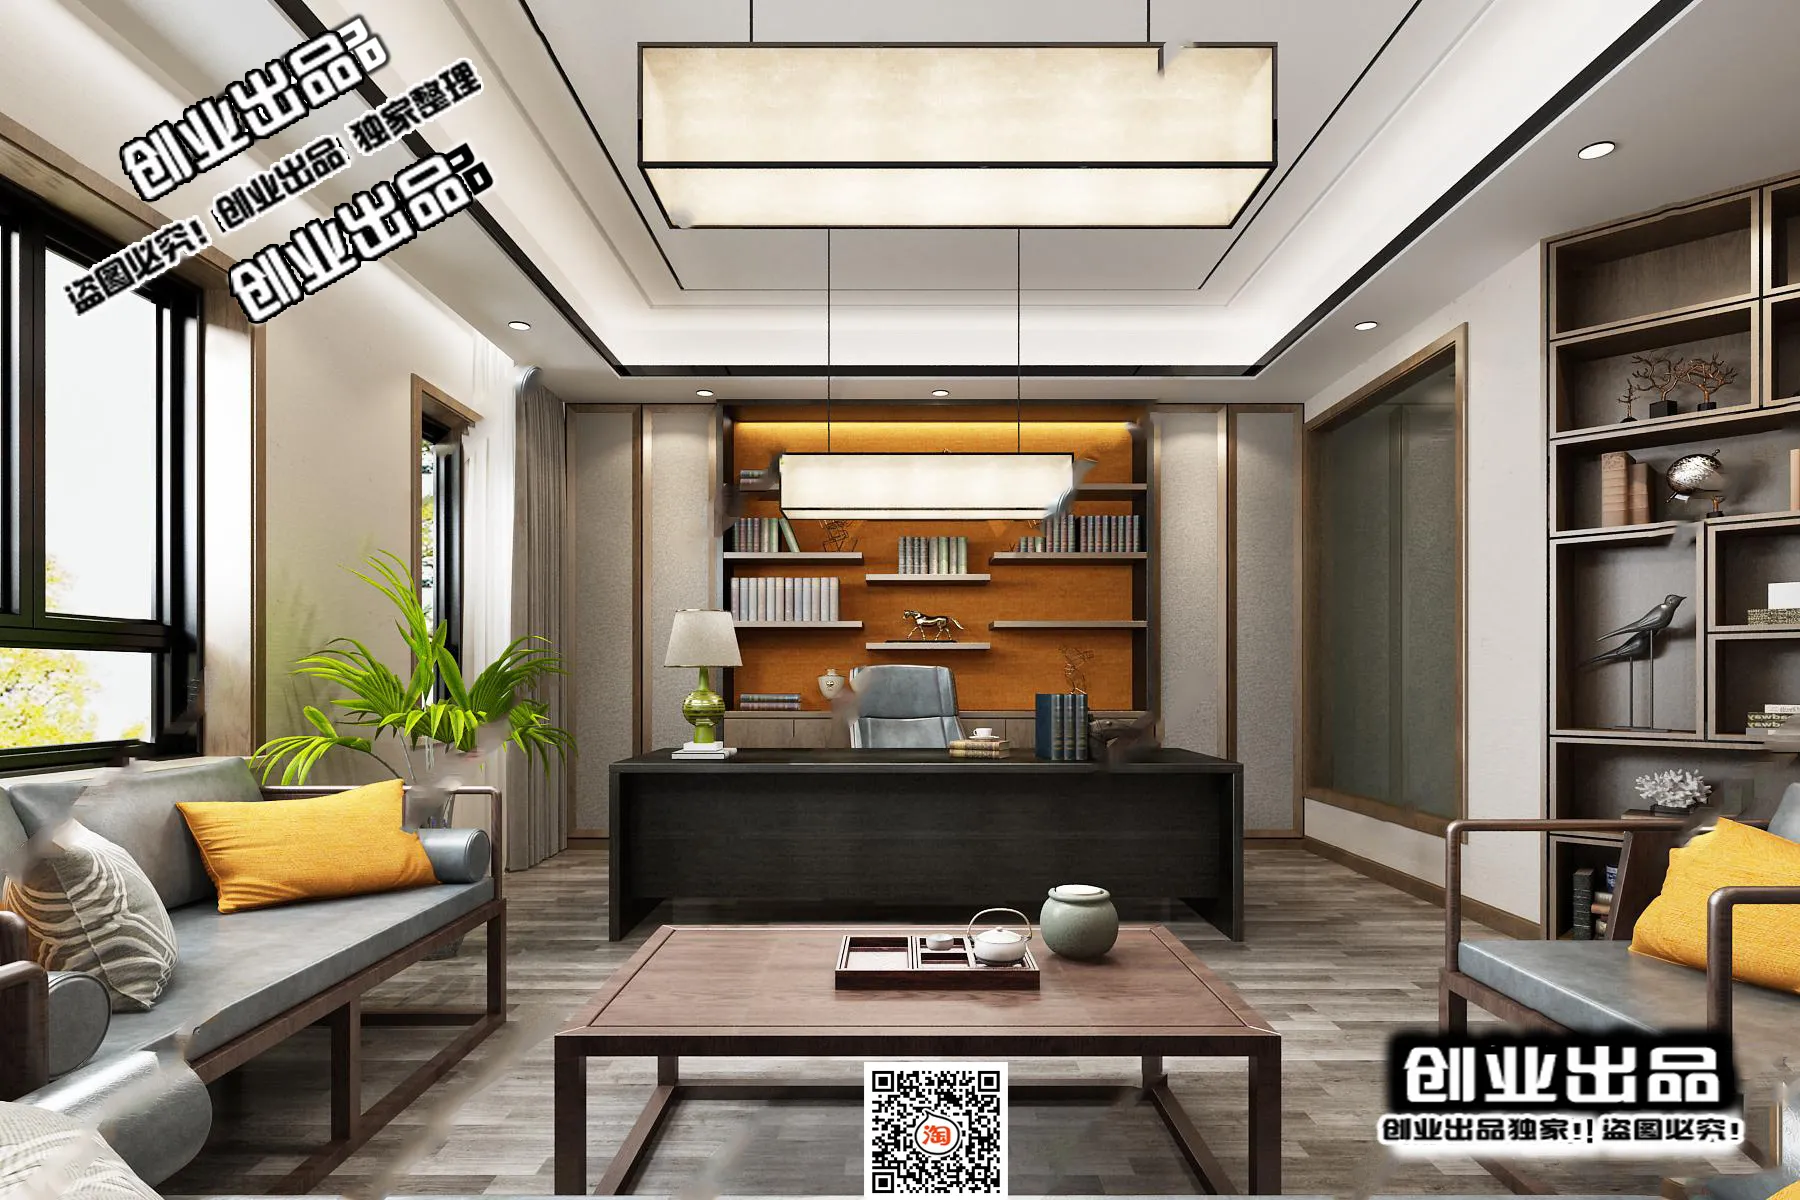 3D OFFICE INTERIOR (VRAY) – MANAGER ROOM 3D SCENES – 073